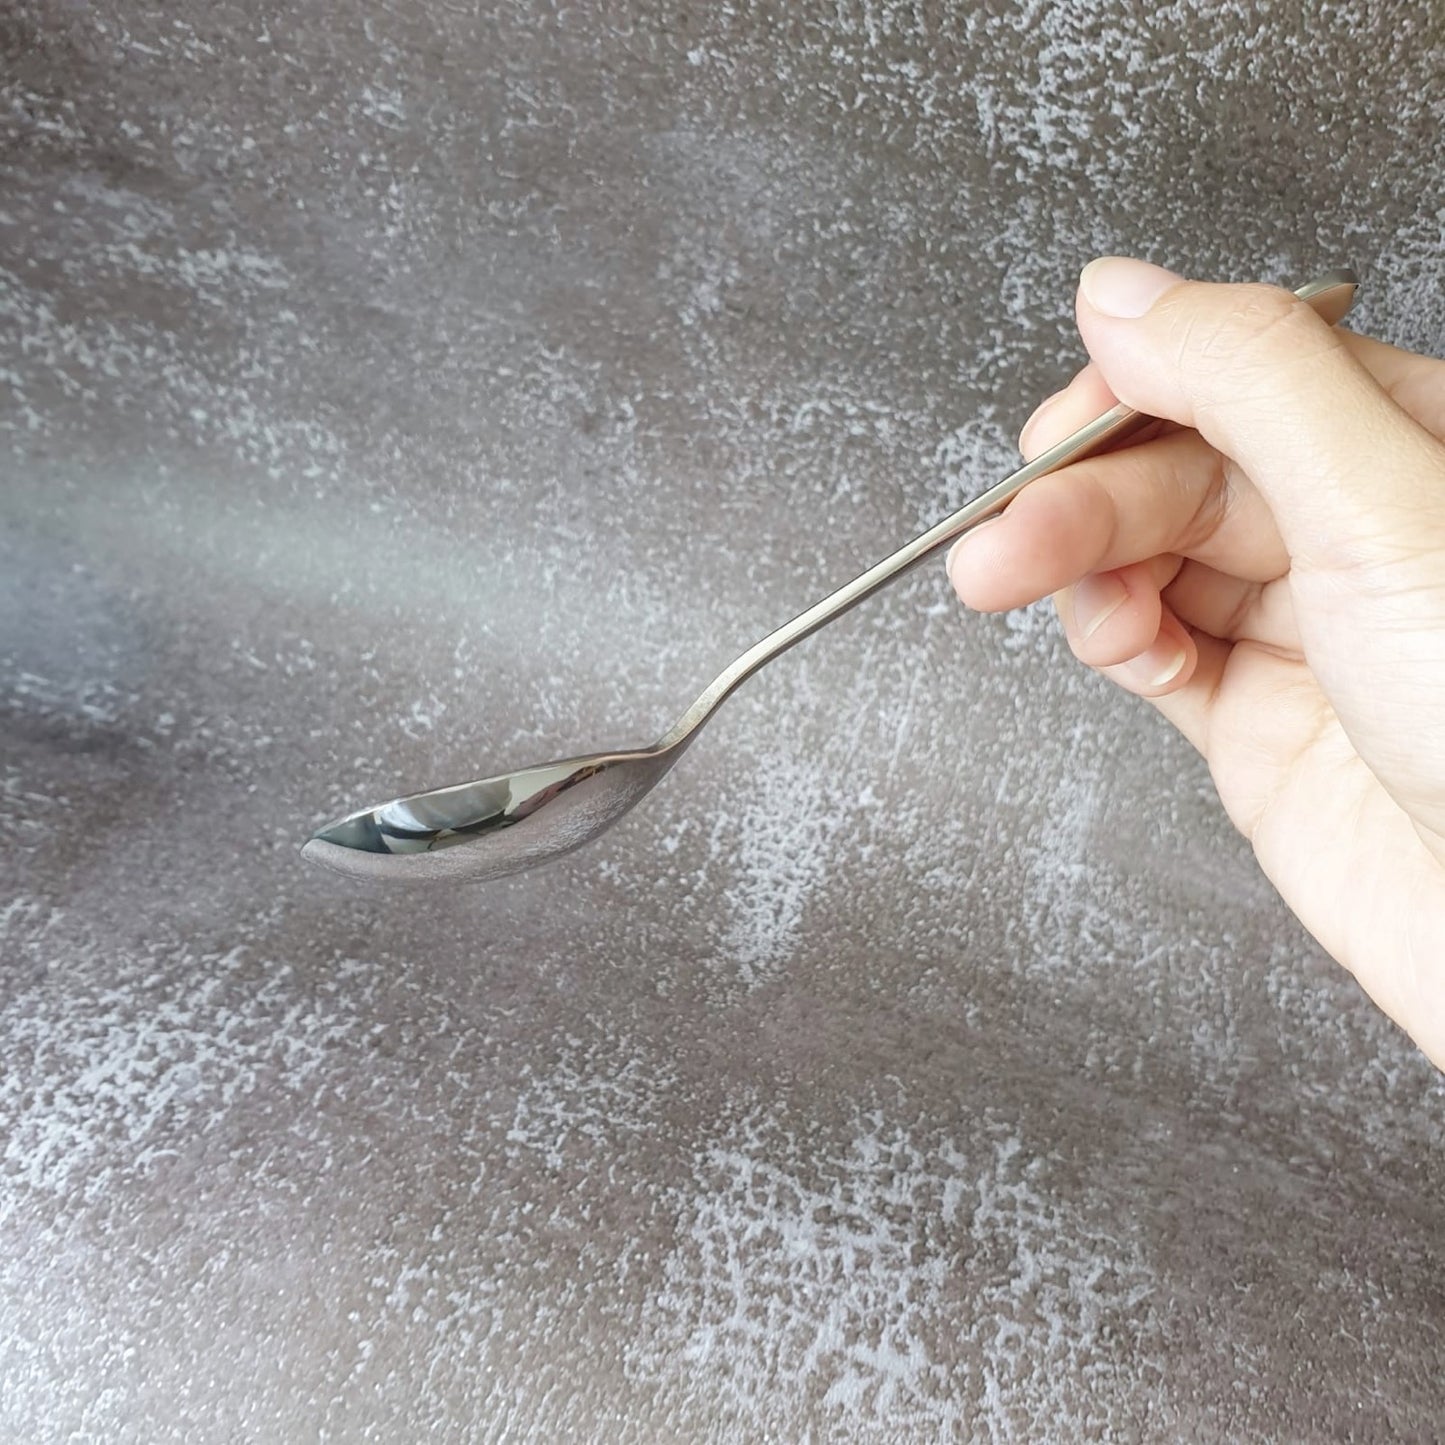 Stainless Steel 7 ml Round Spoon